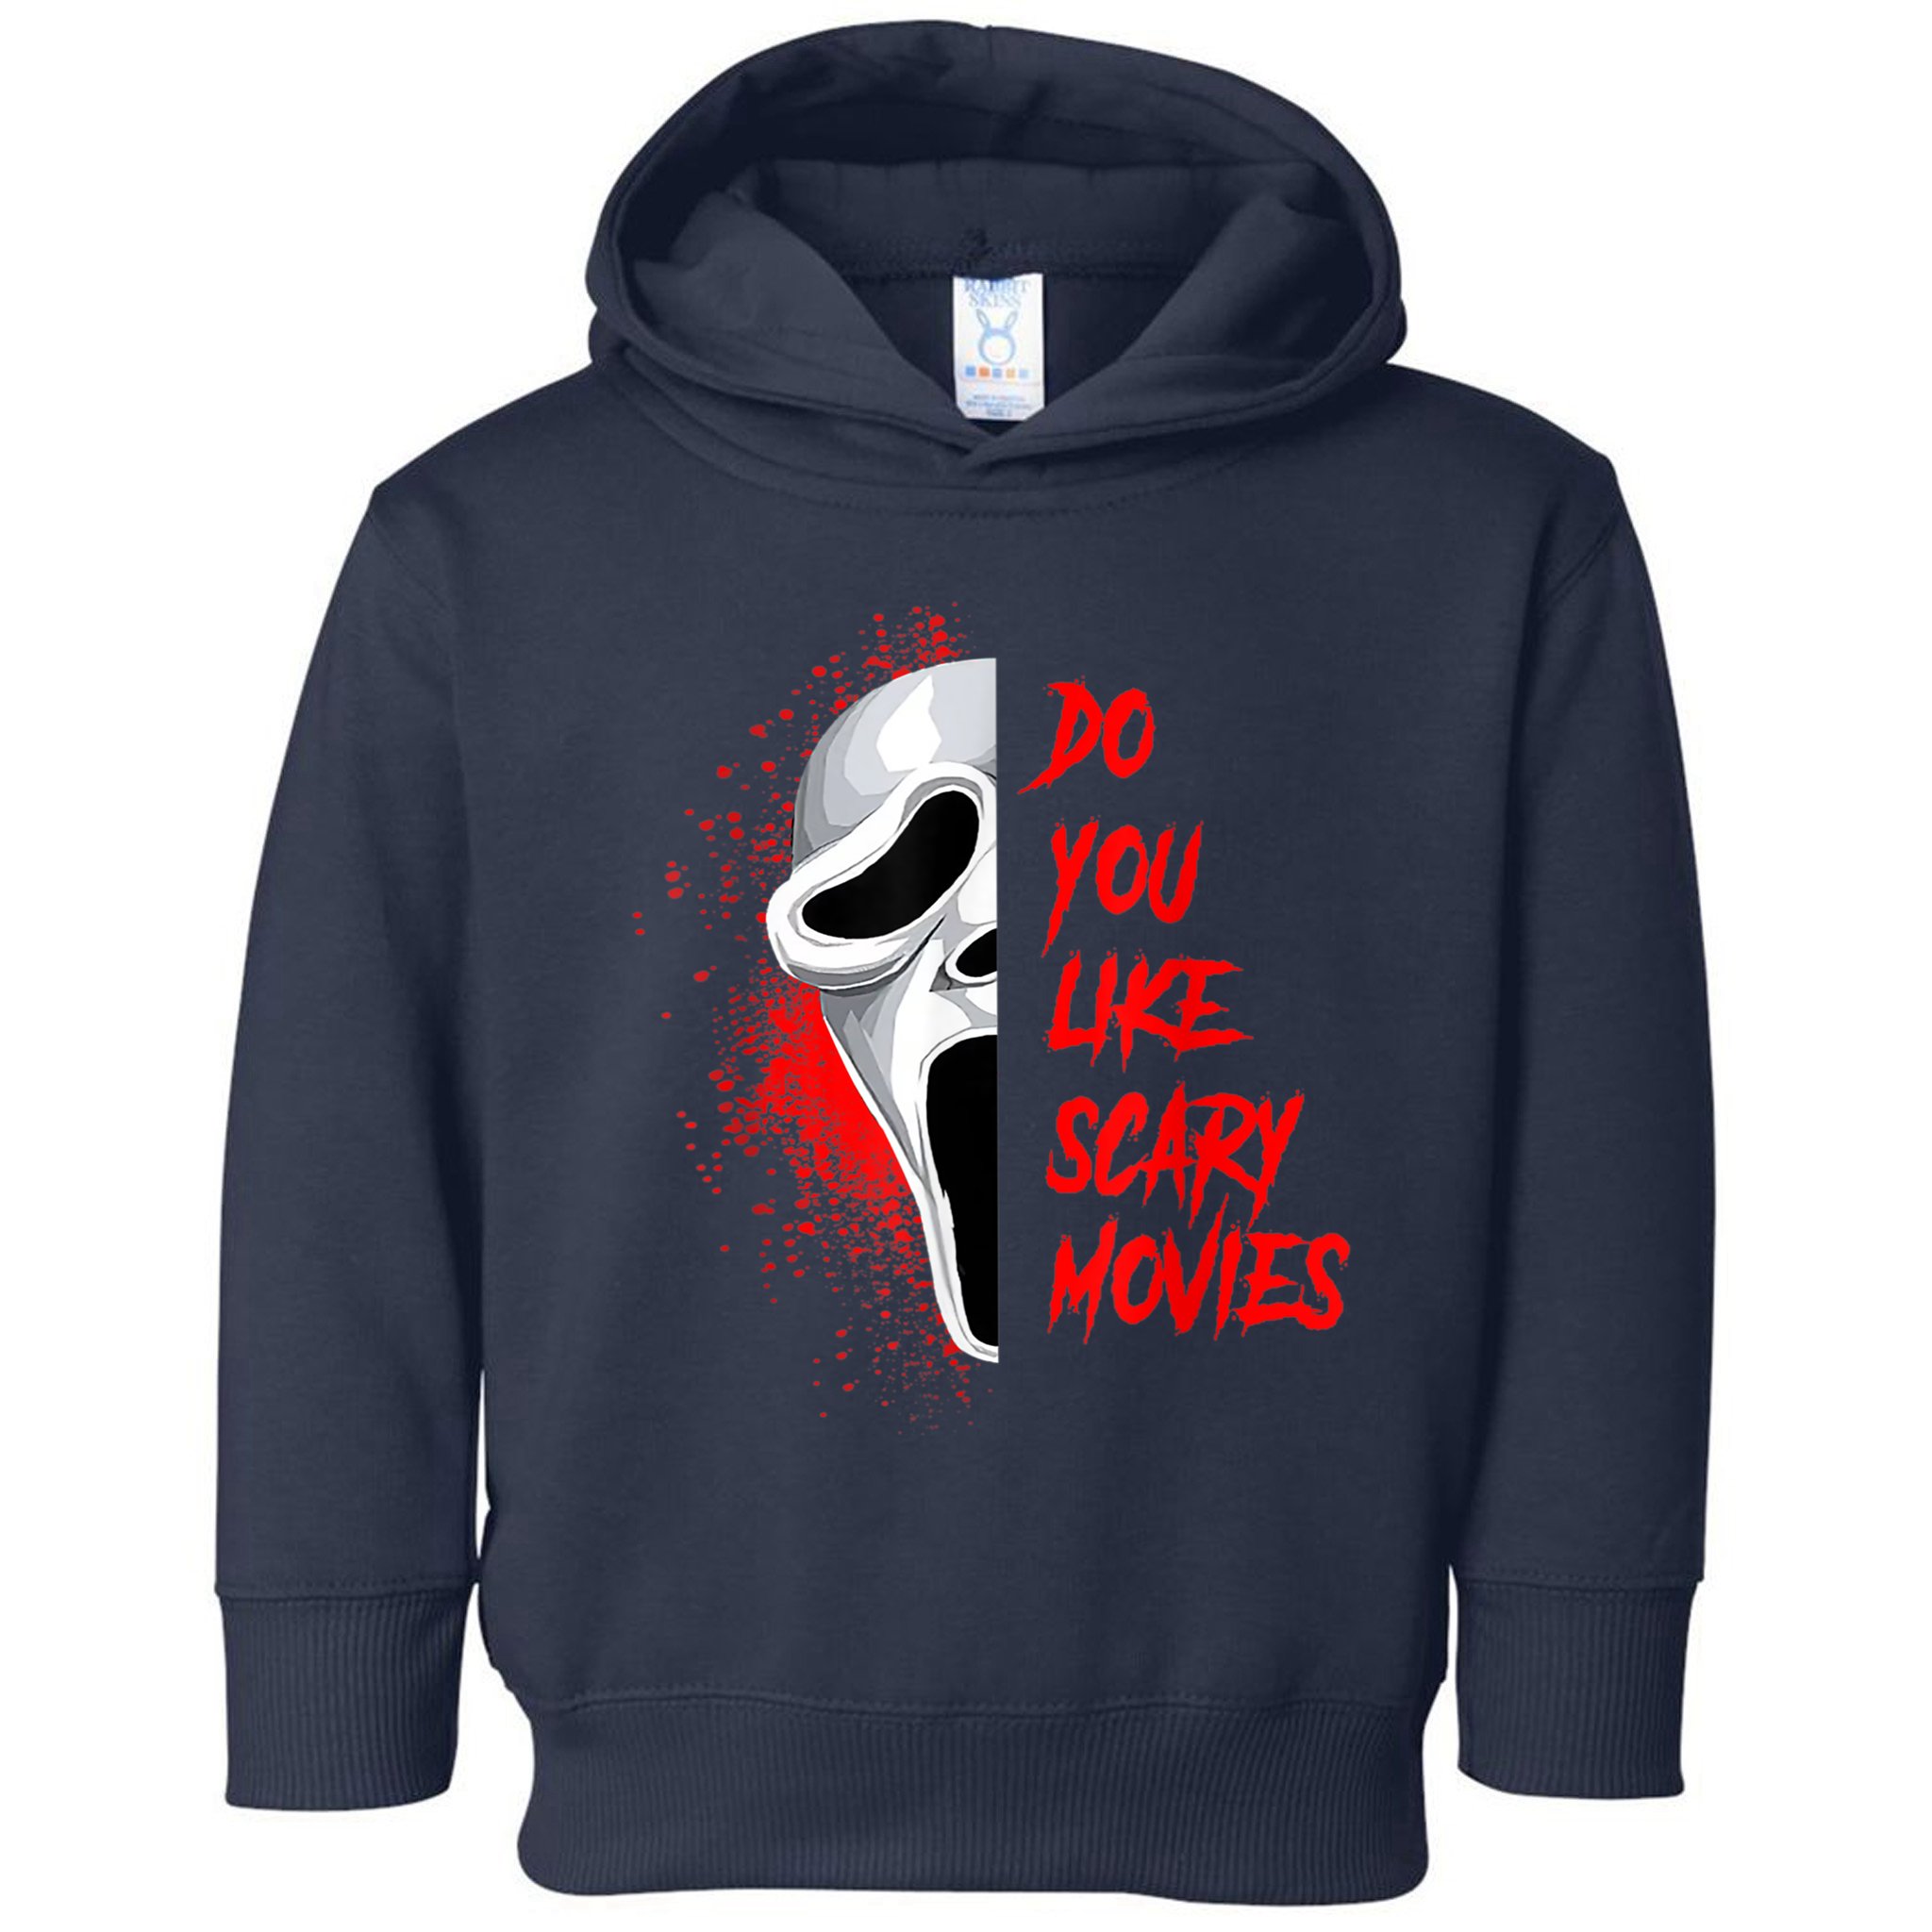 Ghostface Want To Watch Scary Movies? Men's Black Graphic Hoodie-Small